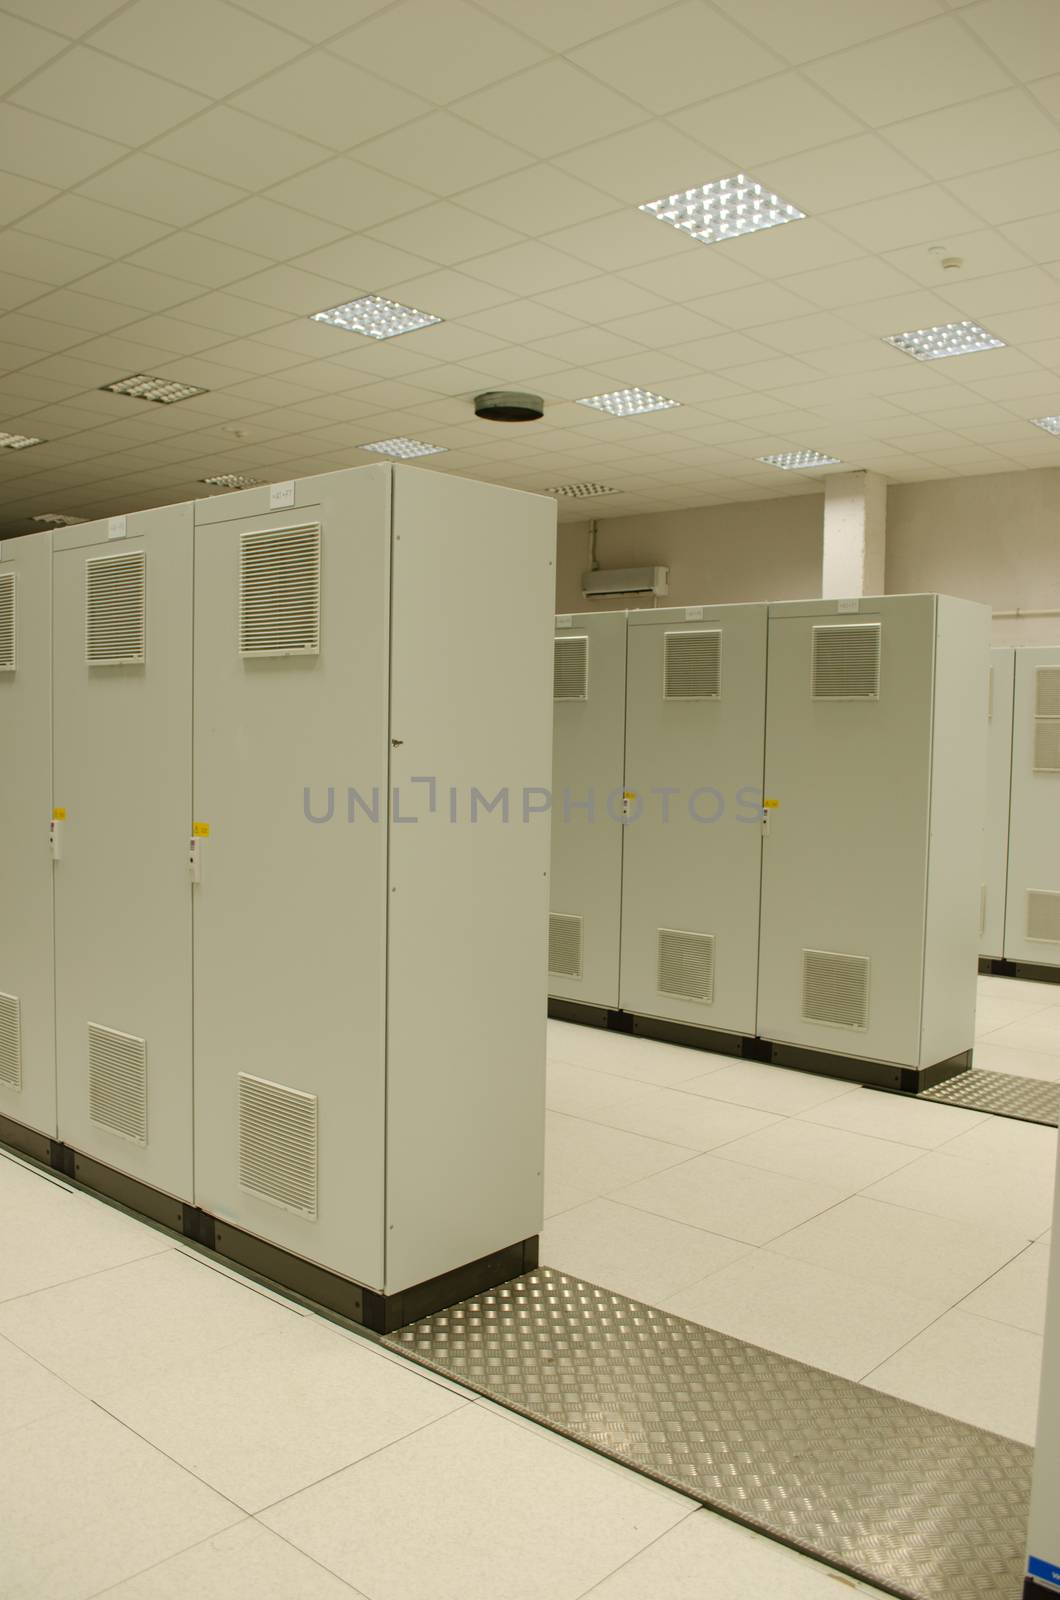 Powerful servers computers placed in special cabinets stored in scientific research center.